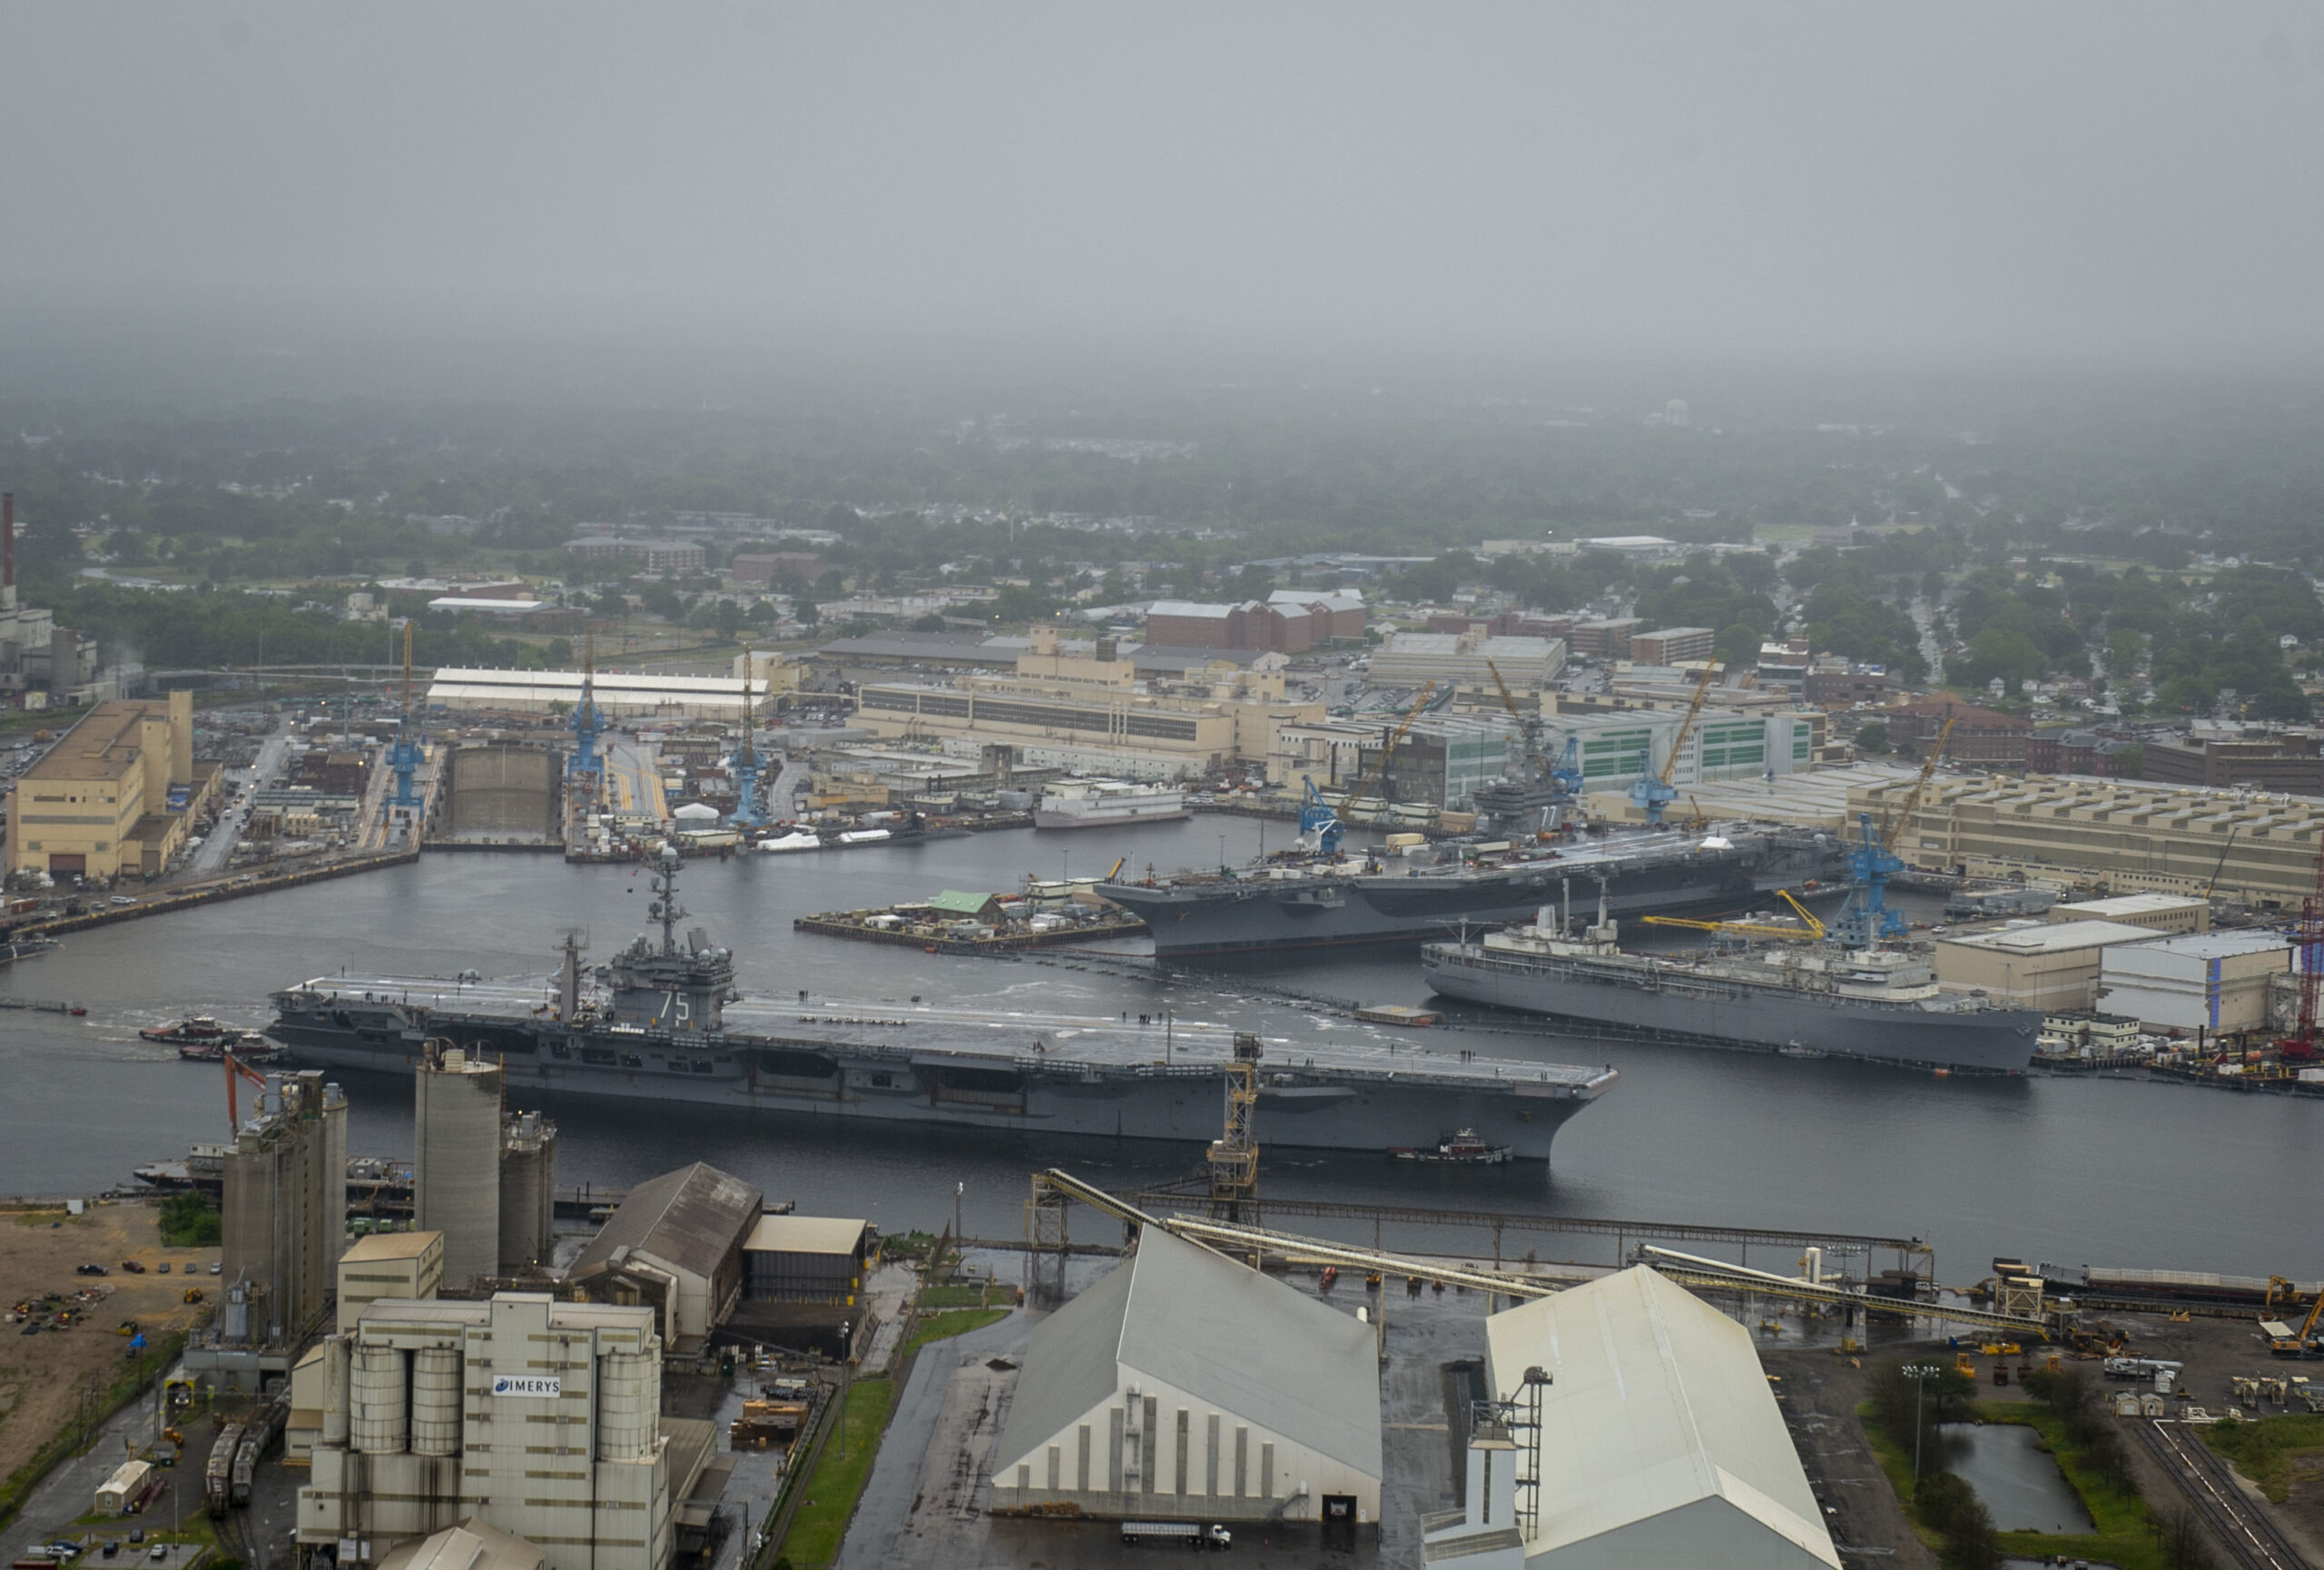 Navy Taps Aecom To Refurbish Berths, Dry Docks For Future Aircraft Carriers  - Breaking Defense